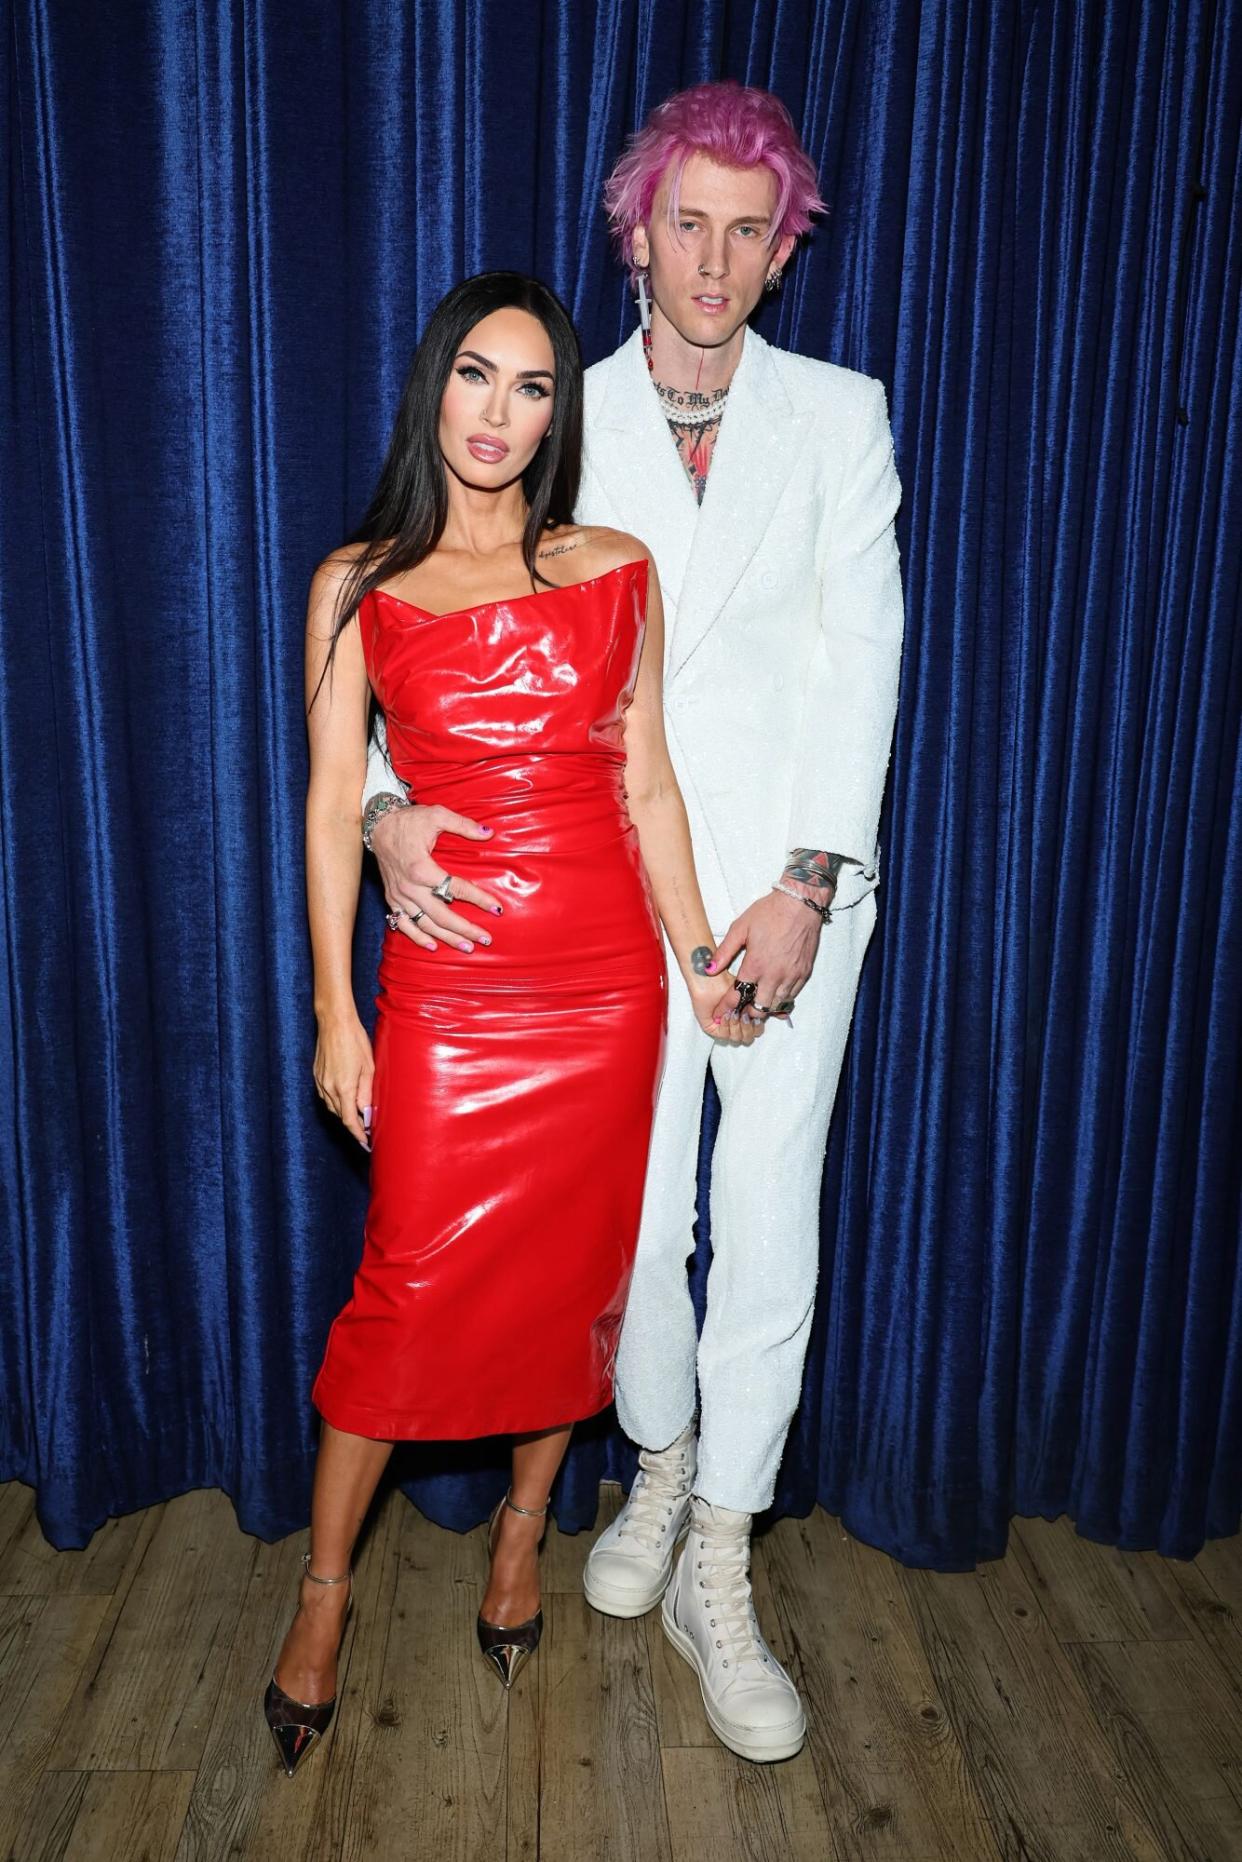 Megan Fox and Machine Gun Kelly attend the "Taurus" premiere during the 2022 Tribeca Festival at Beacon Theatre on June 09, 2022 in New York City.